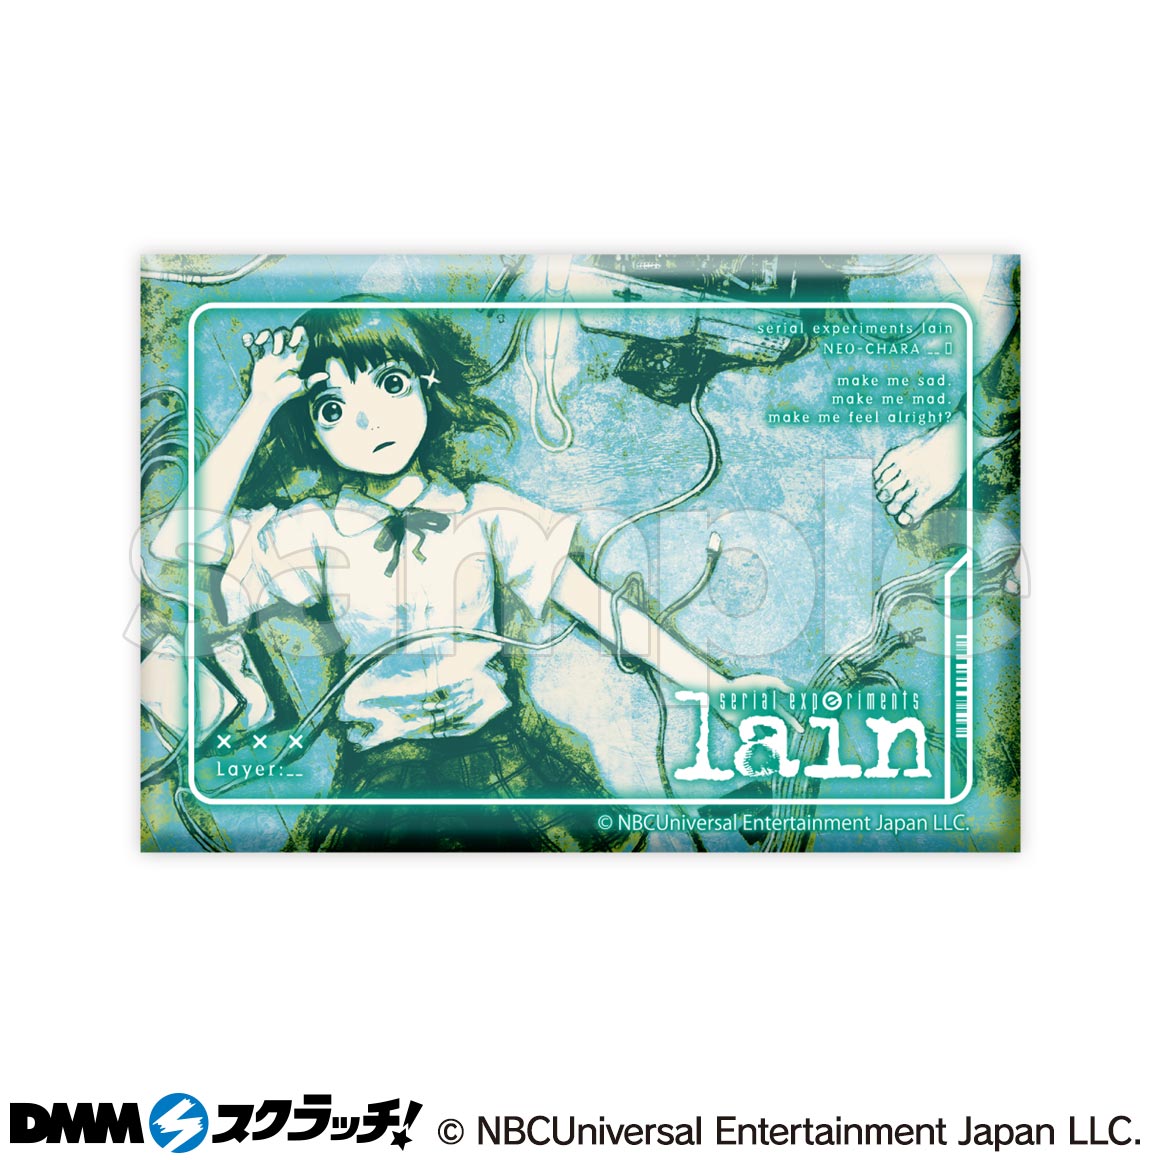 TVアニメ「serial experiments lain」 スクラッチ【NEO-CHARA】 - DMM 